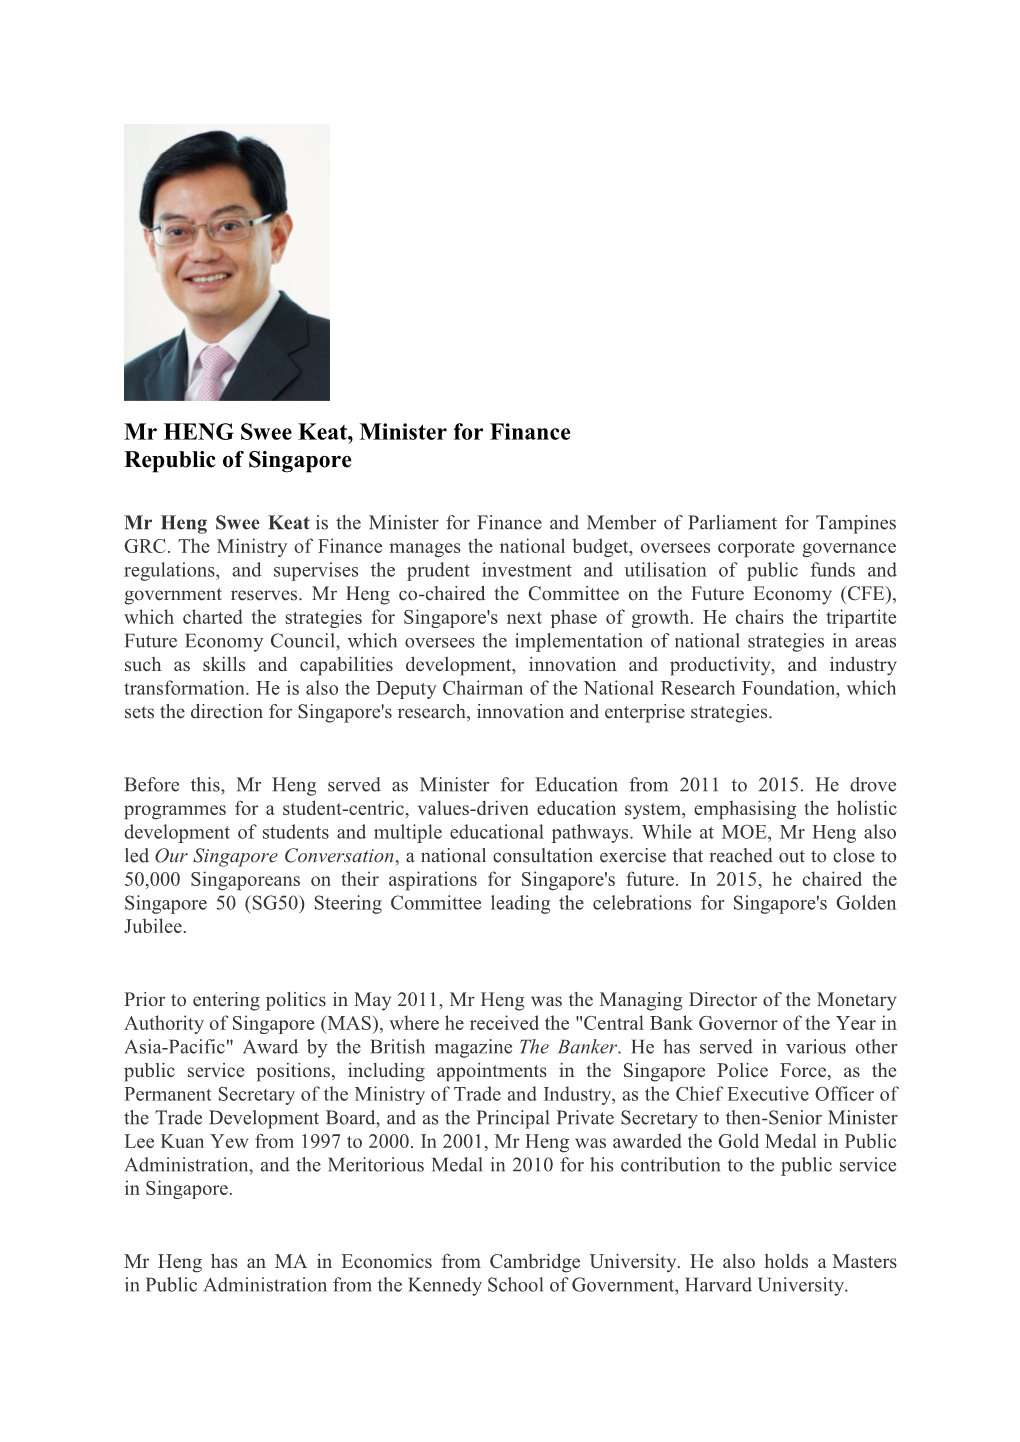 Mr HENG Swee Keat, Minister for Finance Republic of Singapore